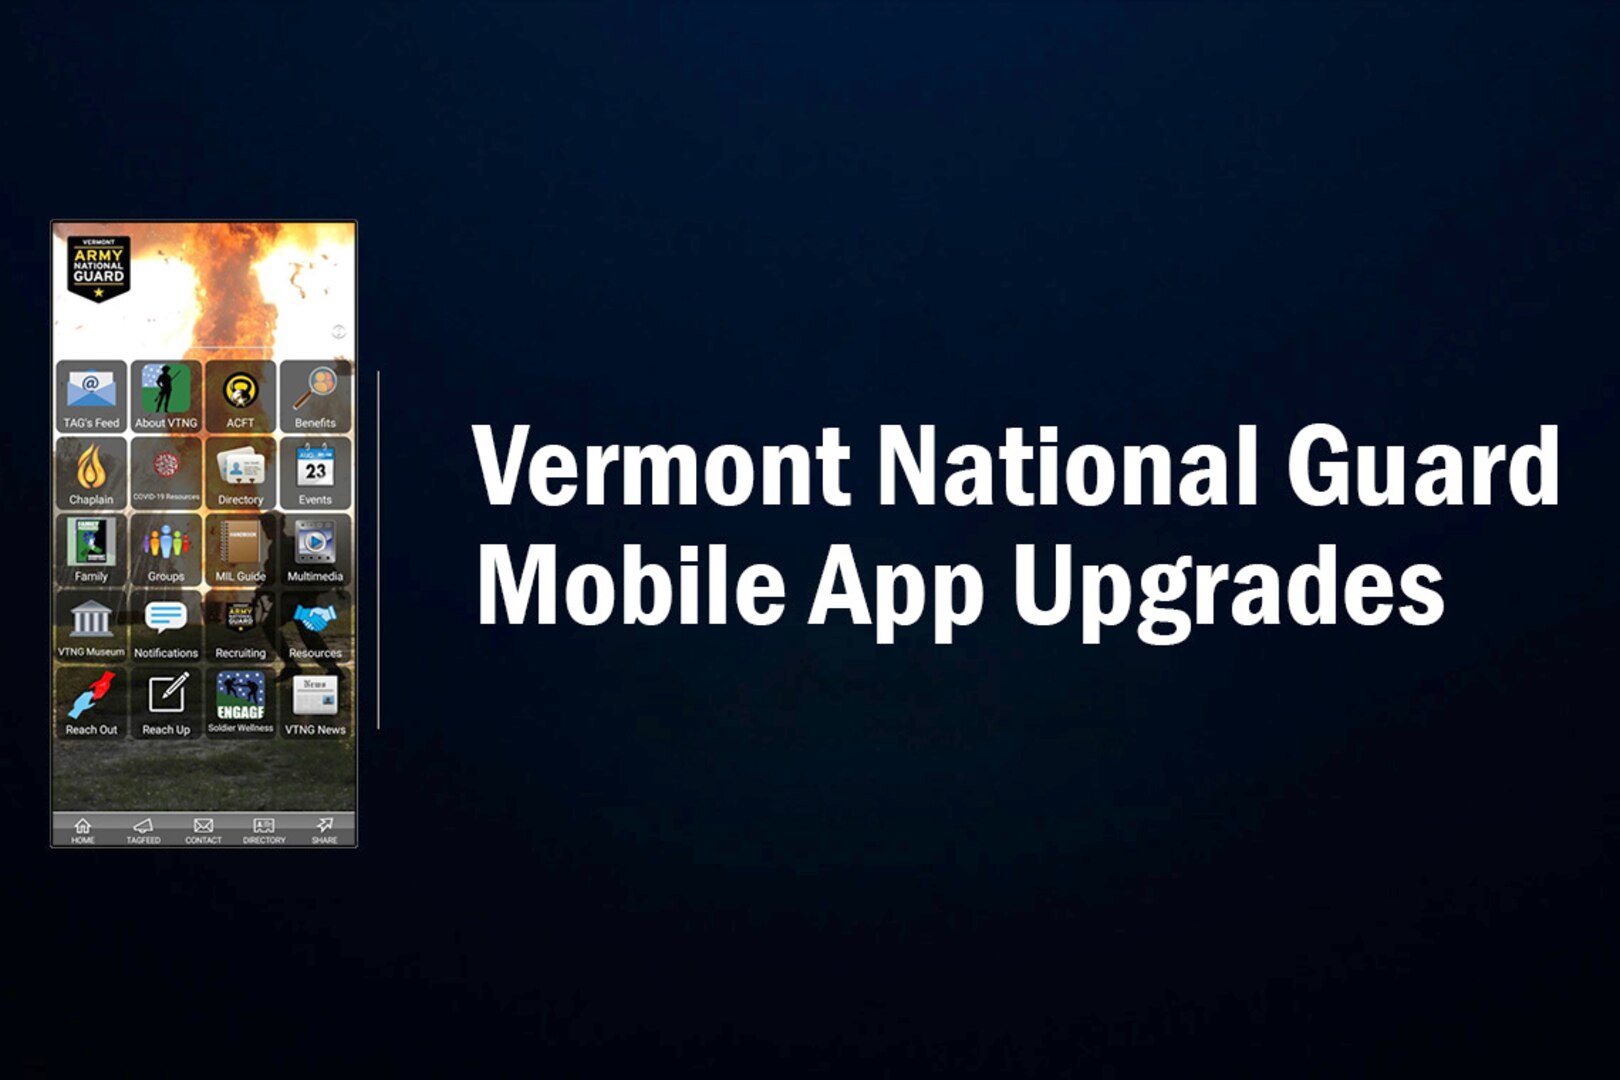 New functionality, resources and content have been added to the Vermont National Guard’s app making it easier for members to access information ranging from The Adjutant General’s Feed, VTNG news, family and military support resources to recruiting contact details and more.